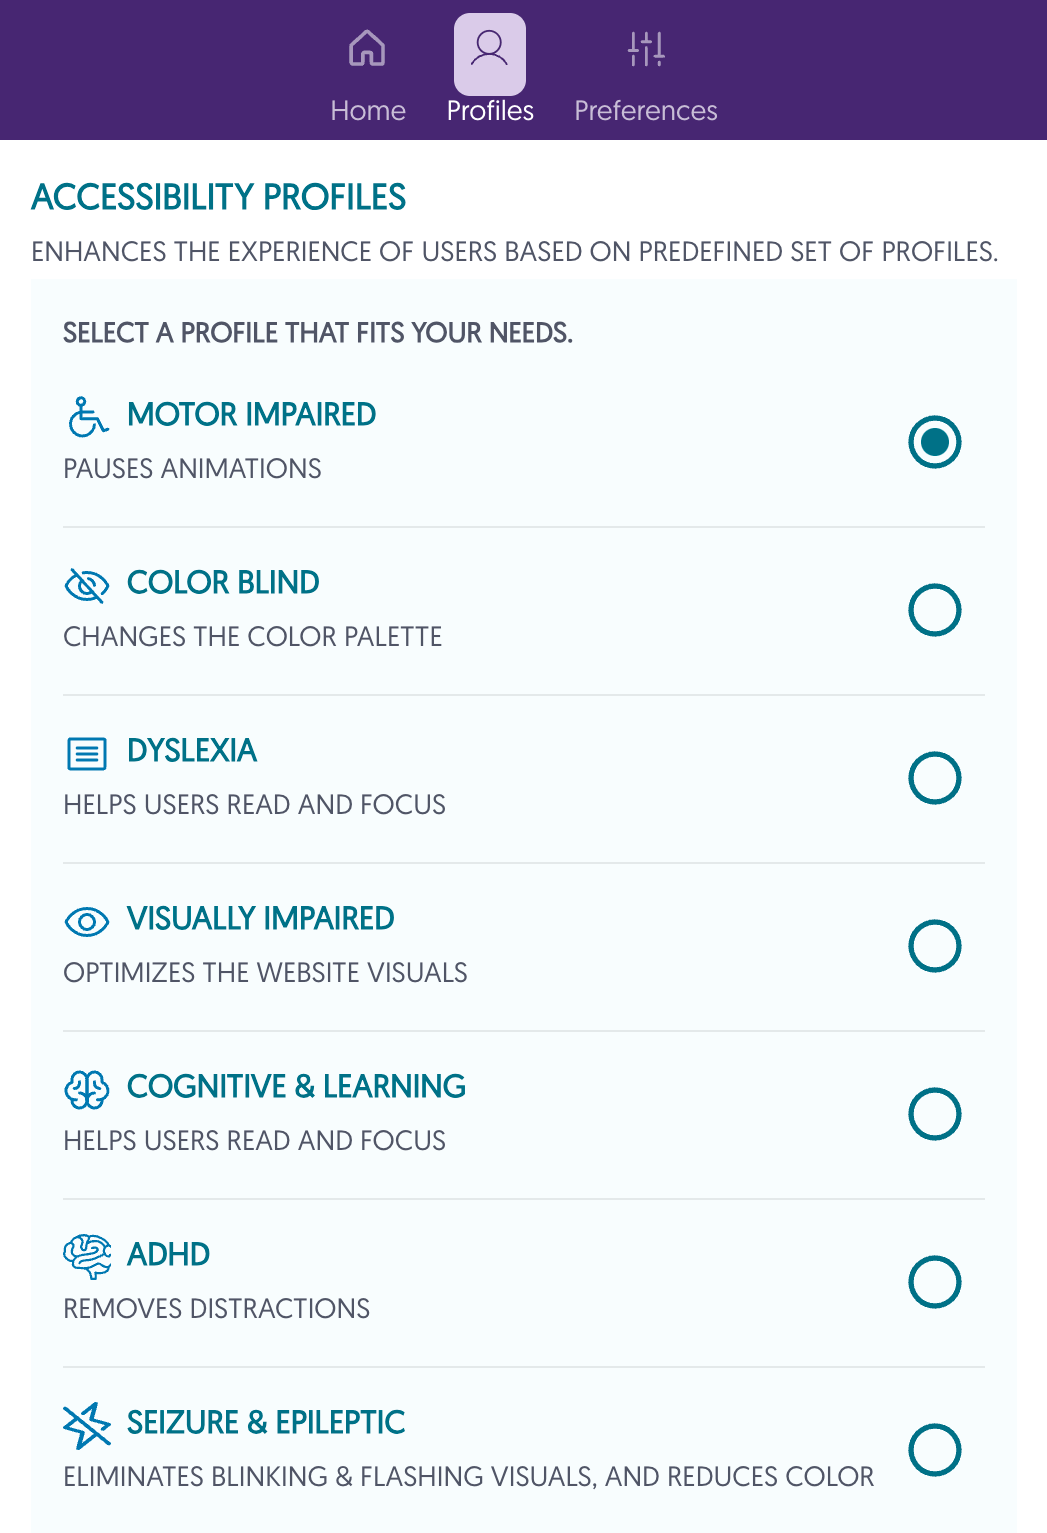 Pop-up of accessibility profile options.